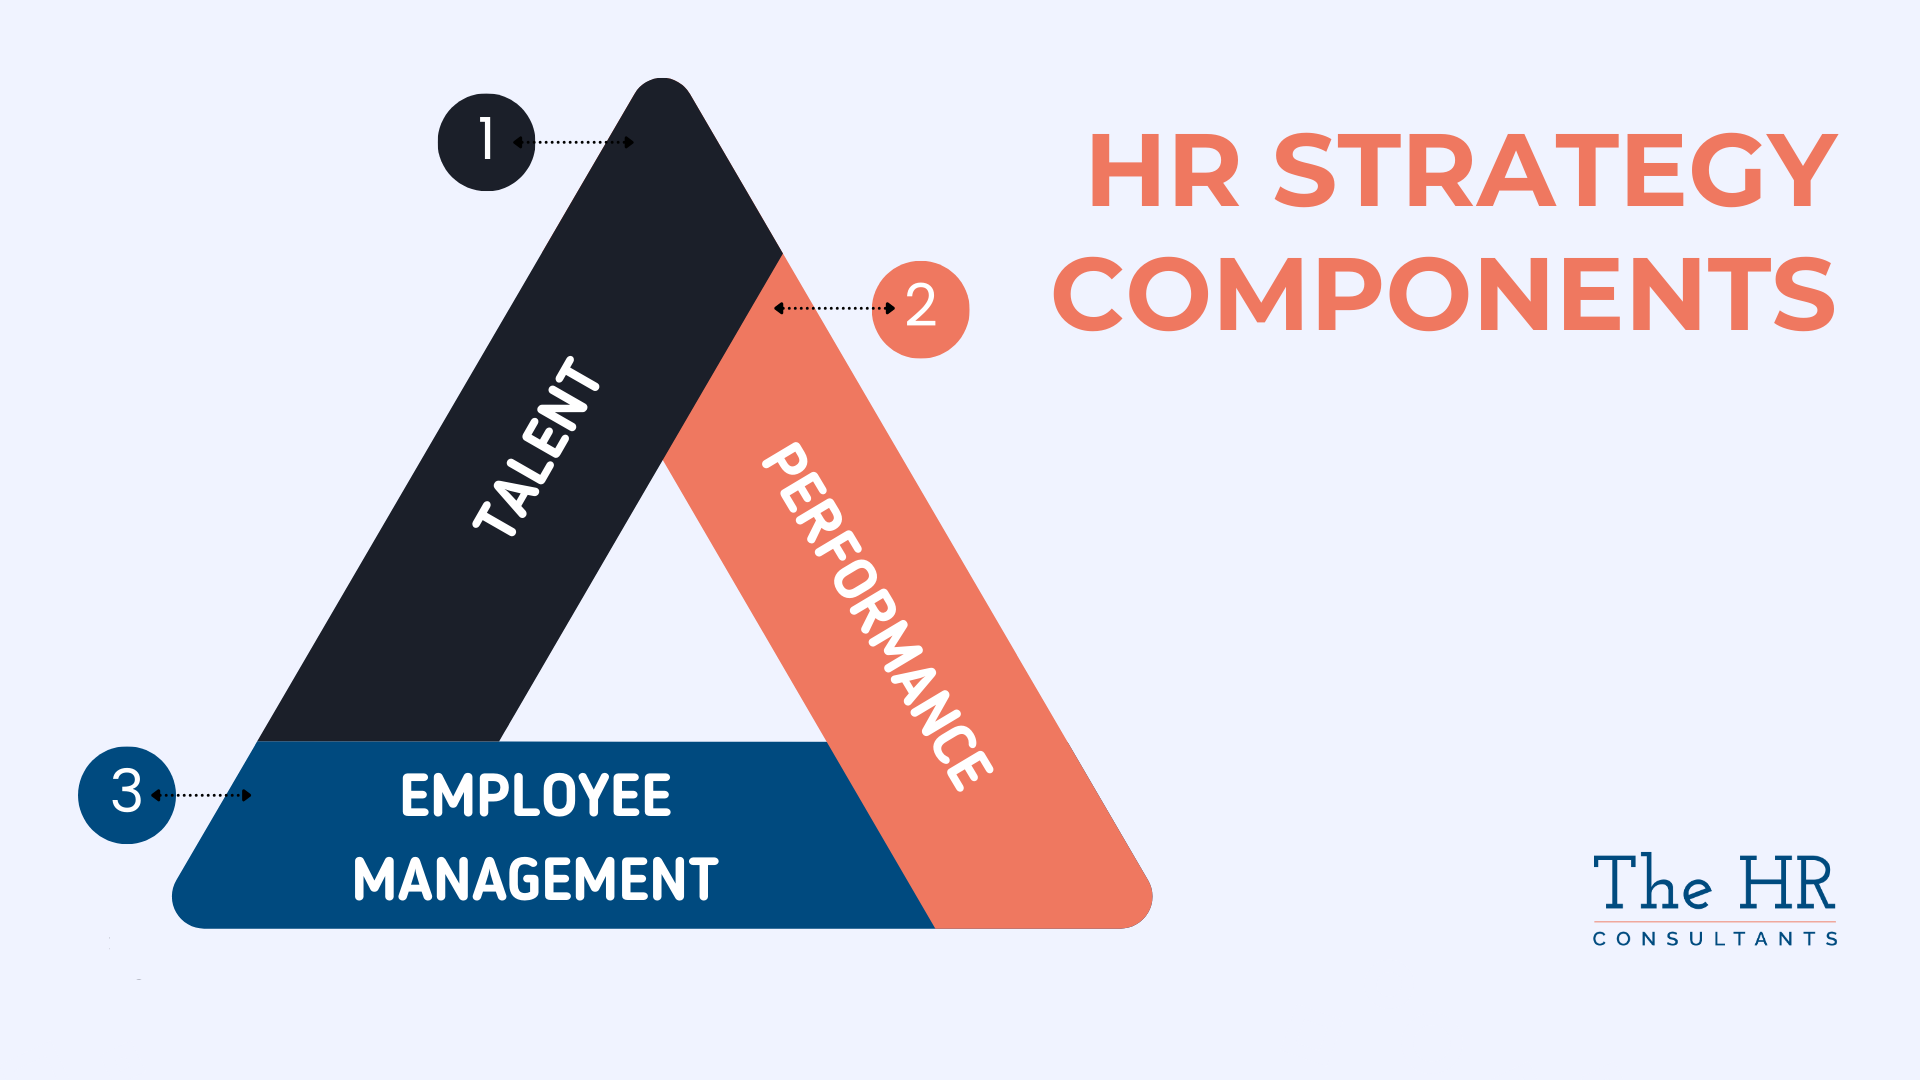 HR Strategy Components